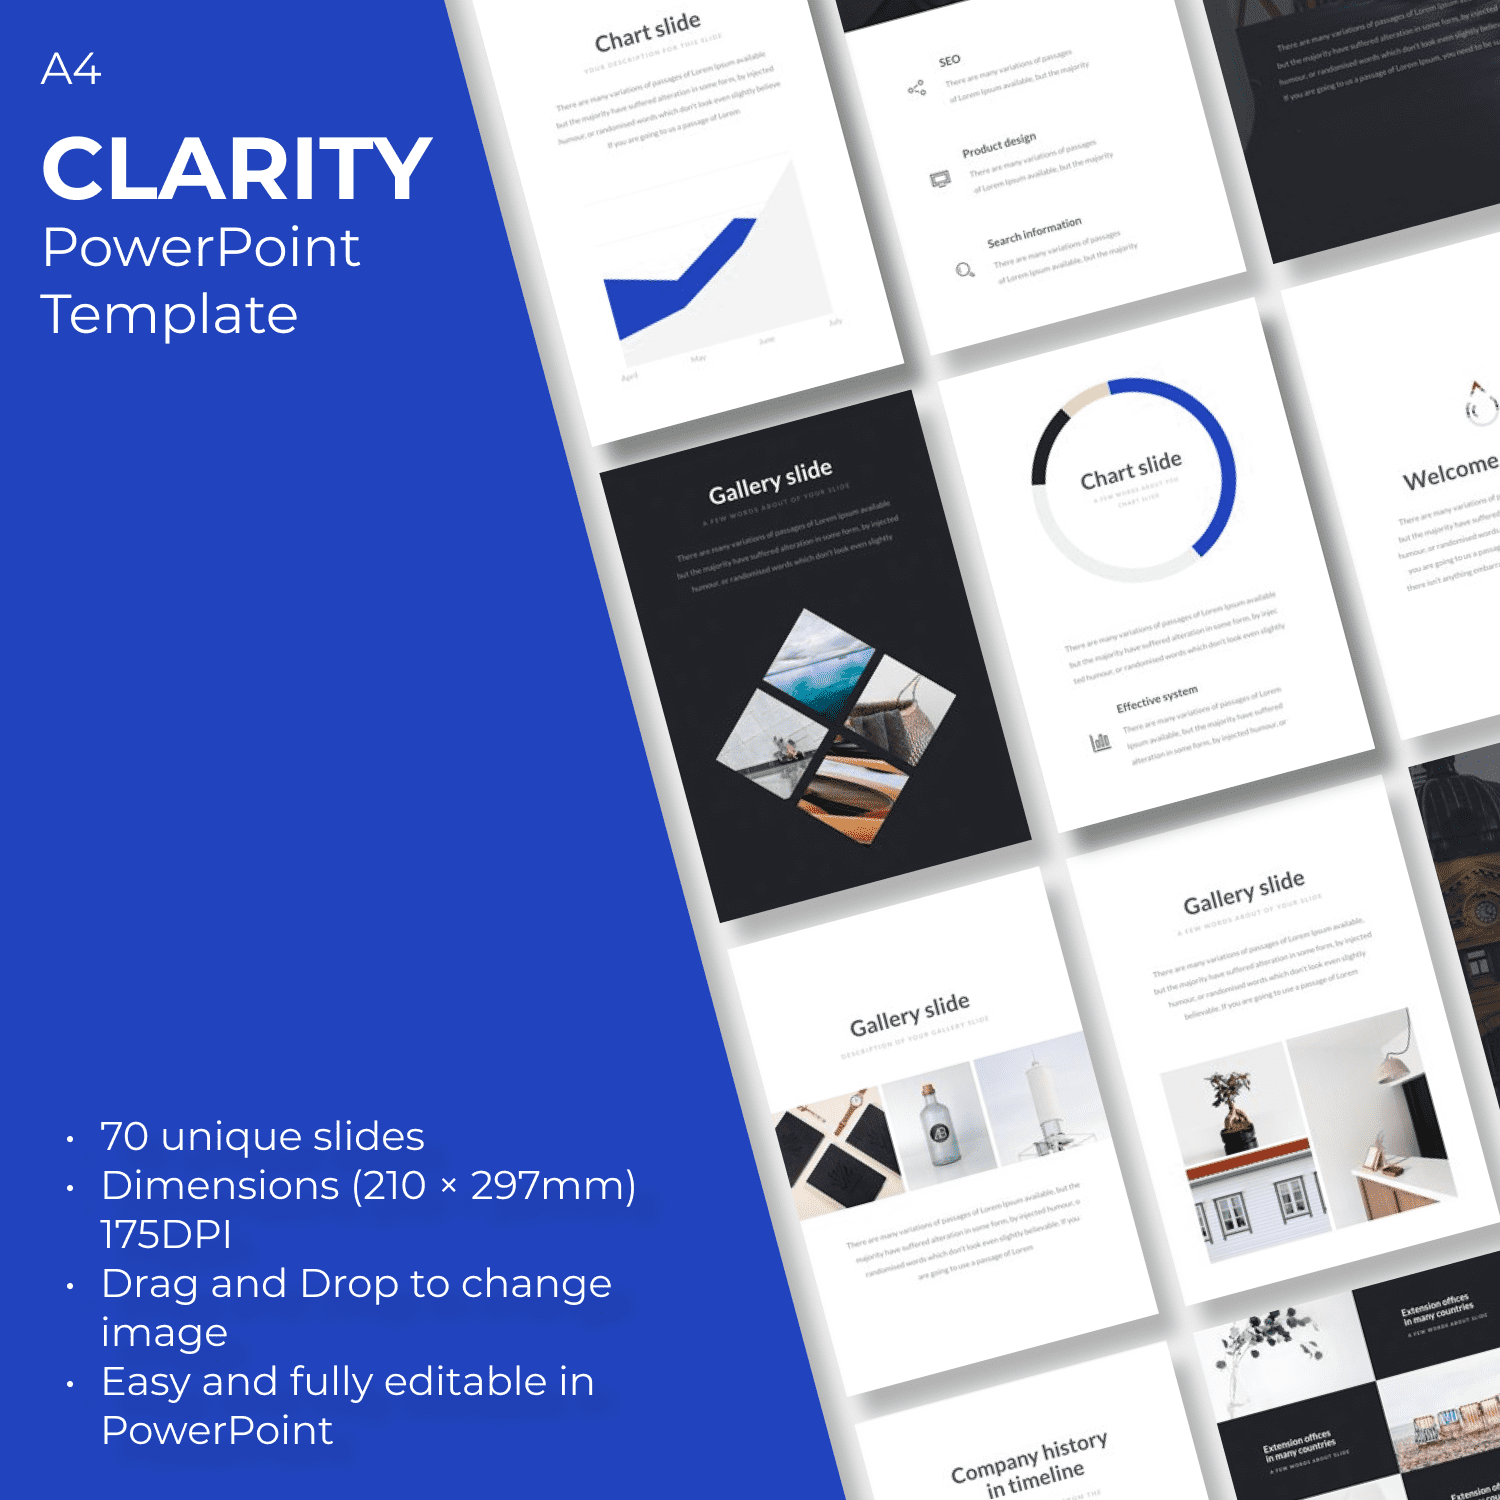 A4 | Clarity PowerPoint Template by MasterBundles.